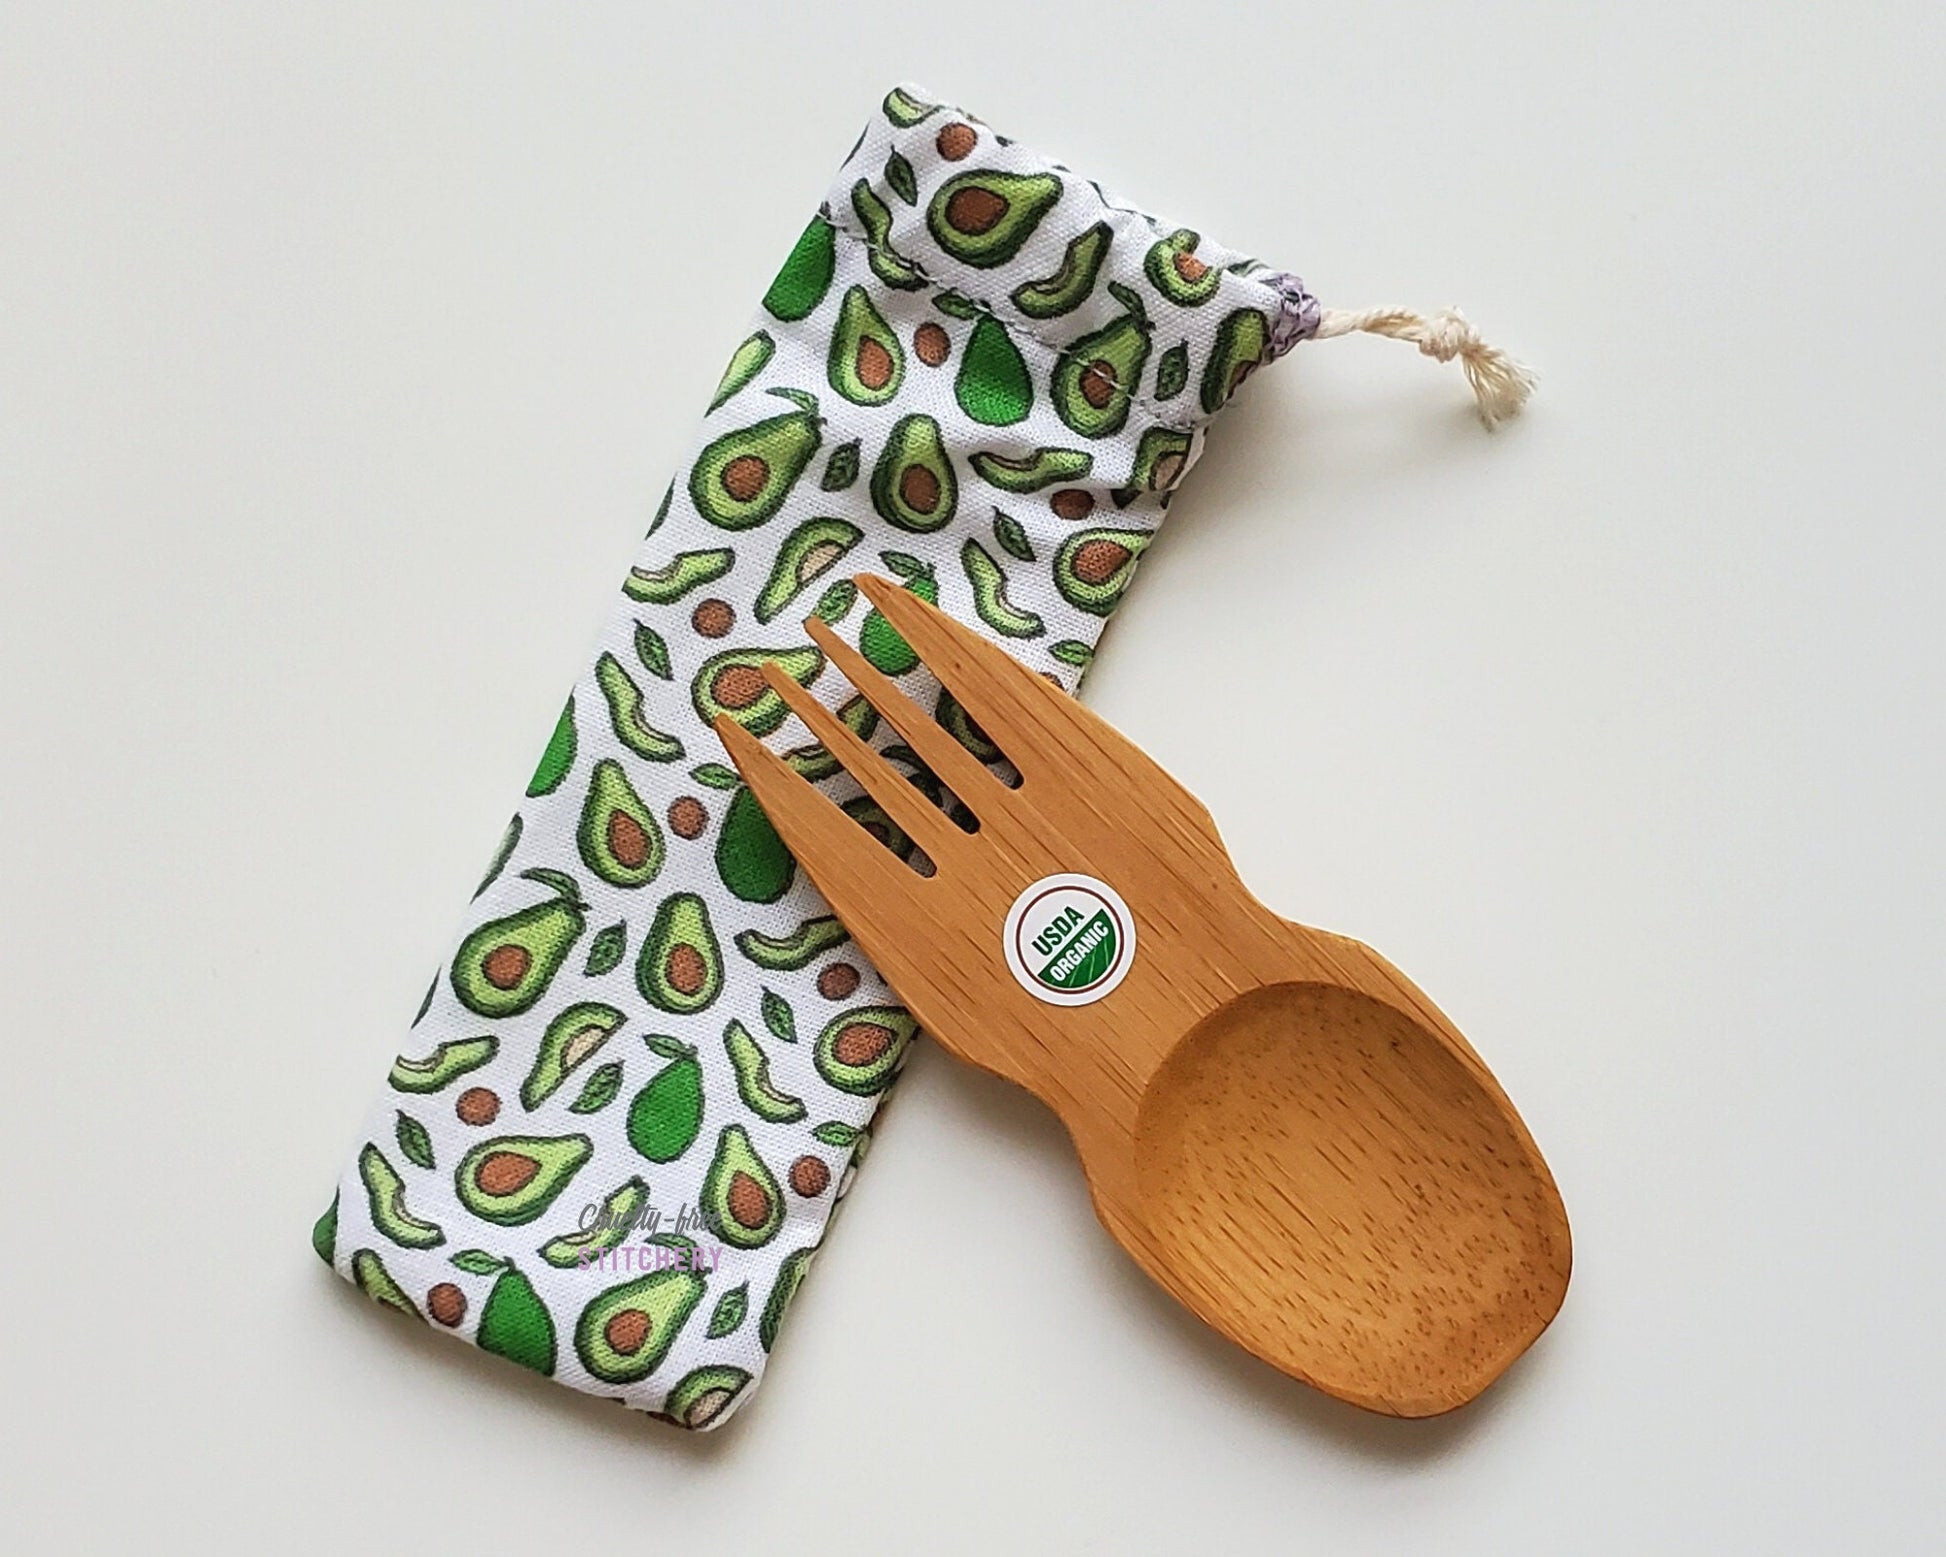 Reusable bamboo spork with pouch. The pouch is a white fabric with tiny avocados, some whole, some half. The pouch is sitting diagonally with the spork partially on top pointing the other way. The spork is small, a double ended fork and spoon.